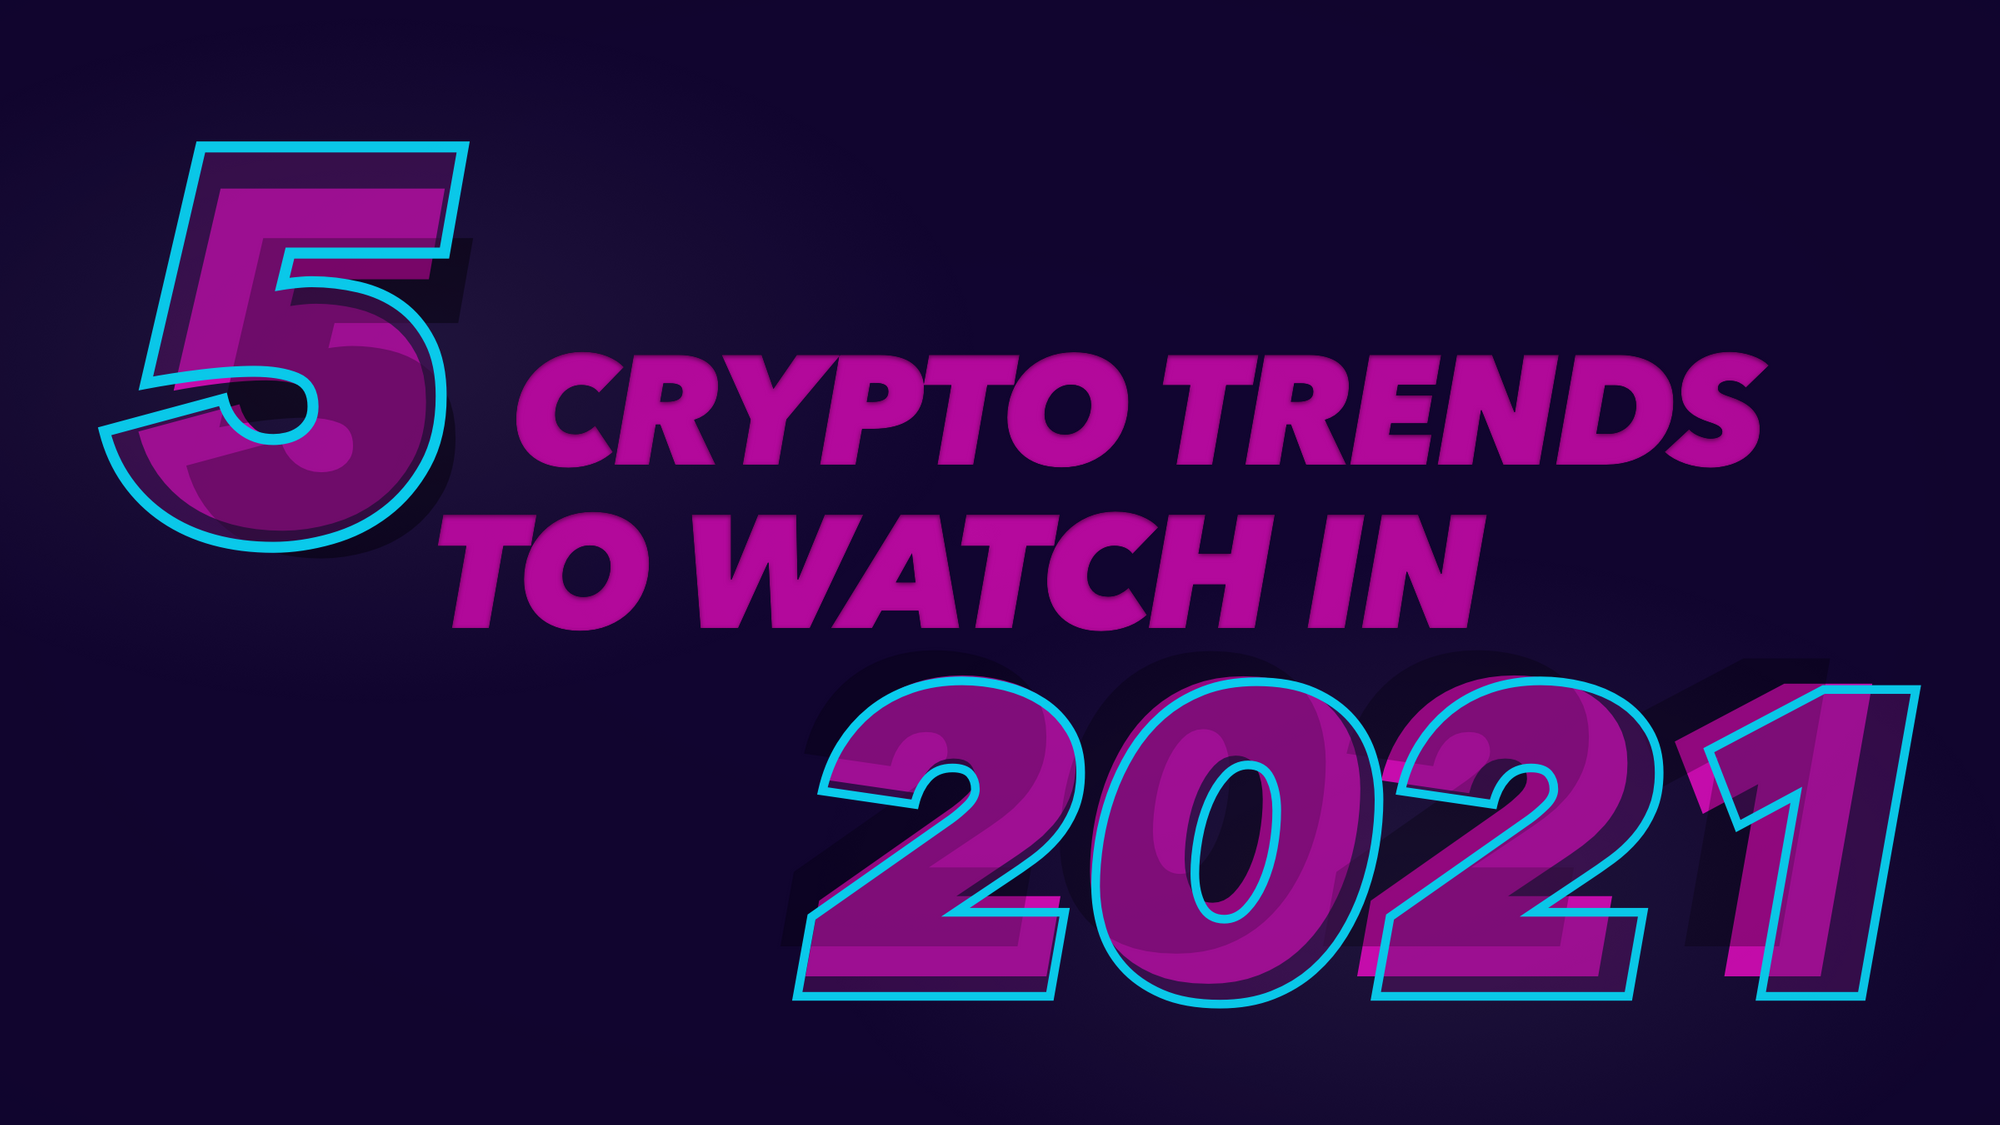 [Coinlist] Five crypto trends to watch in 2021 - AZCoin News